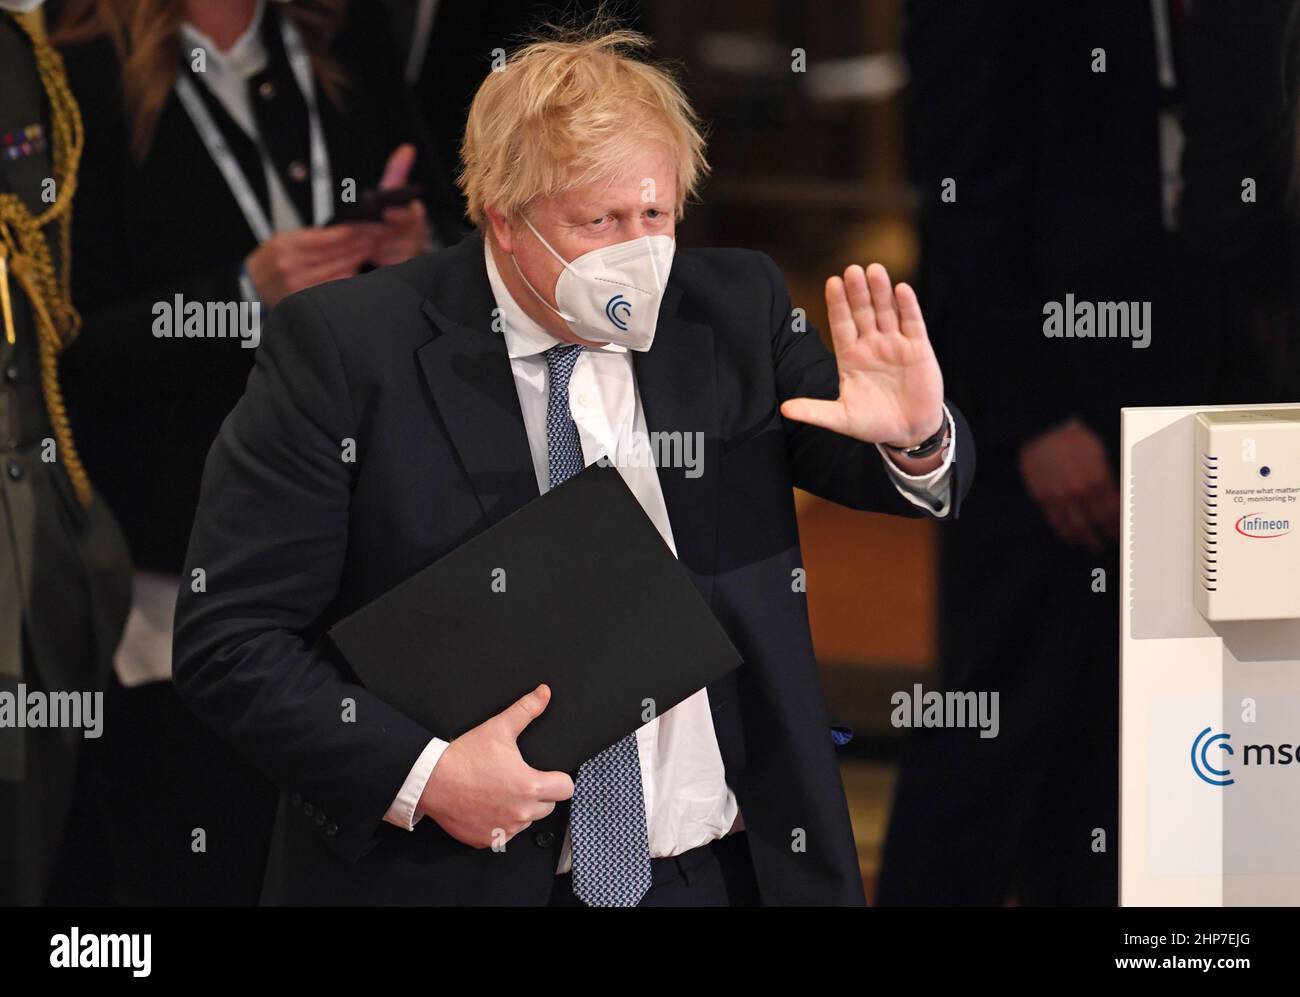 Munich, Germany. 19th Feb, 2022. Boris Johnson, bitish prime minister, waves at the 58th Munich Security Conference. The security conference will take place from Feb. 18 to 20, 2022, at the Bayerischer Hof Hotel. Credit: Tobias Hase/dpa/Alamy Live News Stock Photo